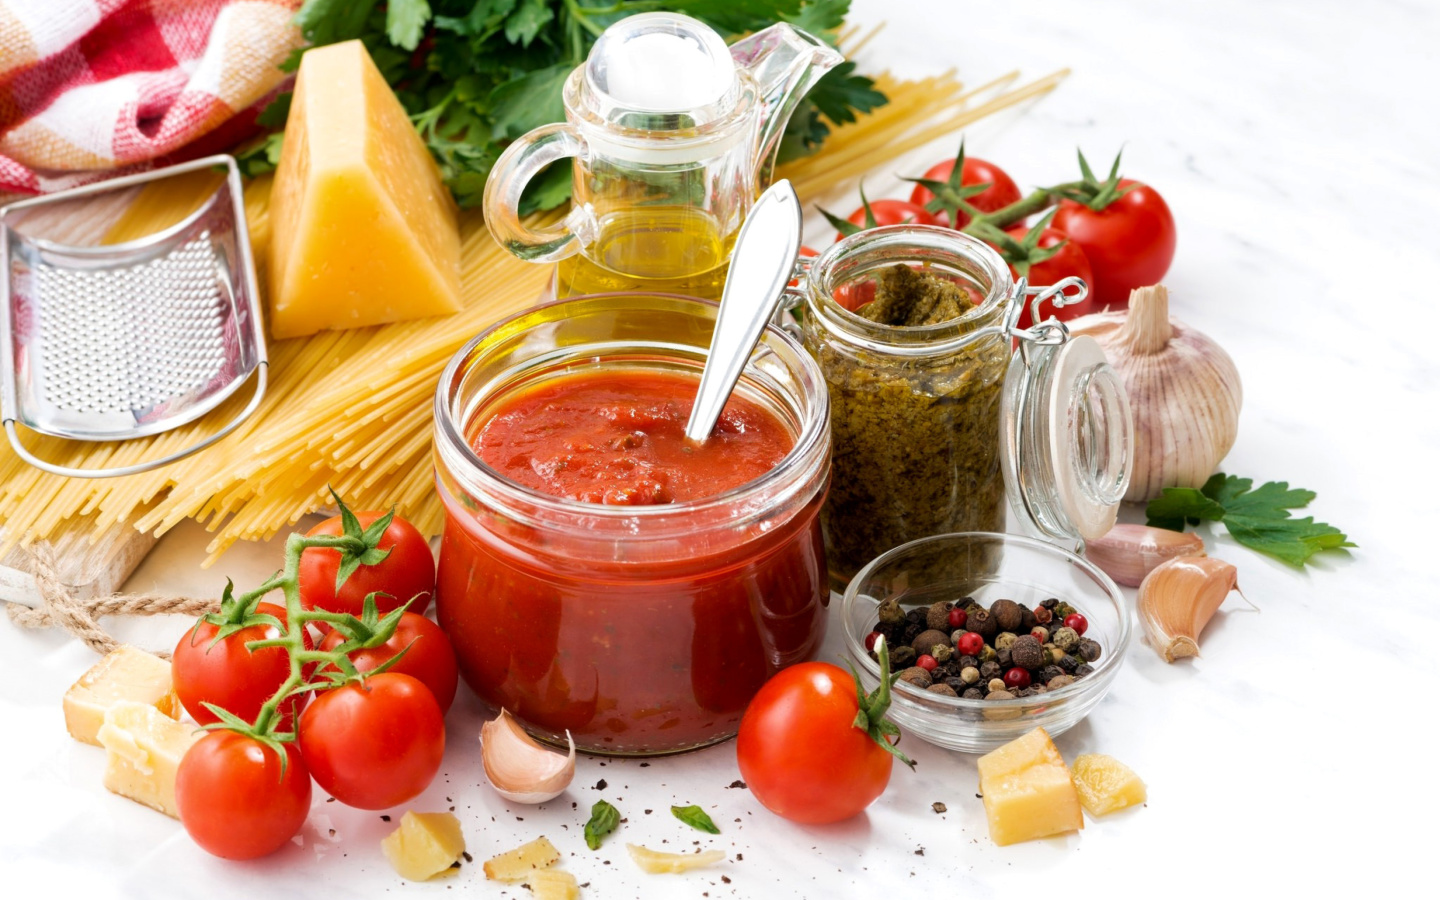 Lecho with tomatoes, spices and cheese wallpaper 1440x900